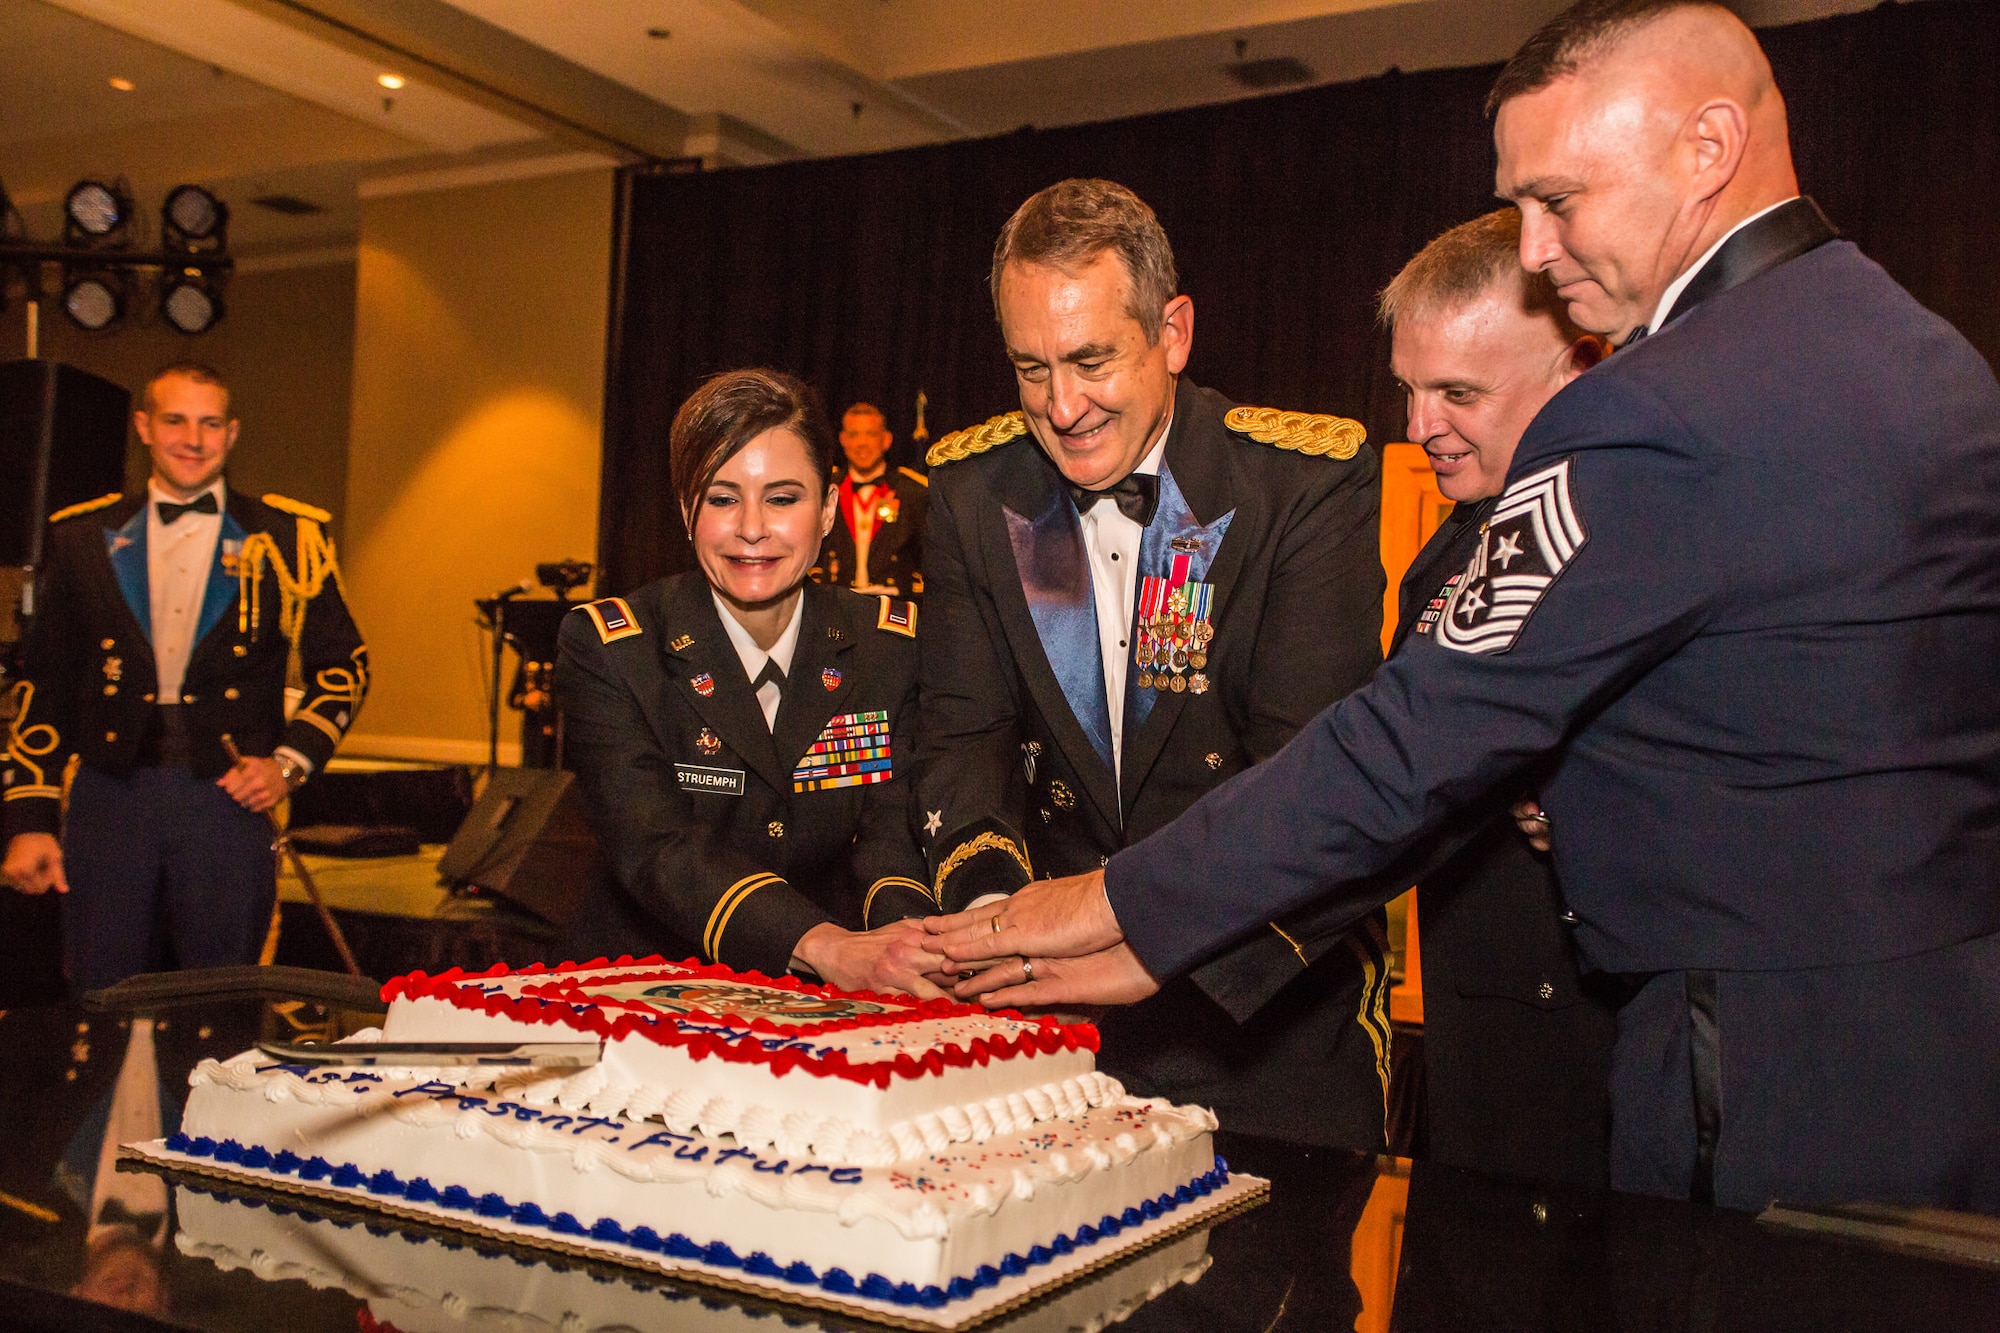 U.S. Army Maj. Gen. Stephen Danner, Adjutant General of the Missouri National Guard cuts the birthday cake during the 7th Annual Missouri National Guard Birthday Ball, at Tan-Tar-A Resort, Osage Beach, Mo., December 12, 2015. The National Guard was celebrating its 379th birthday, which was established on December 13, 1636. (U.S. Air National Guard photo by Senior Airman Patrick P. Evenson/Released)